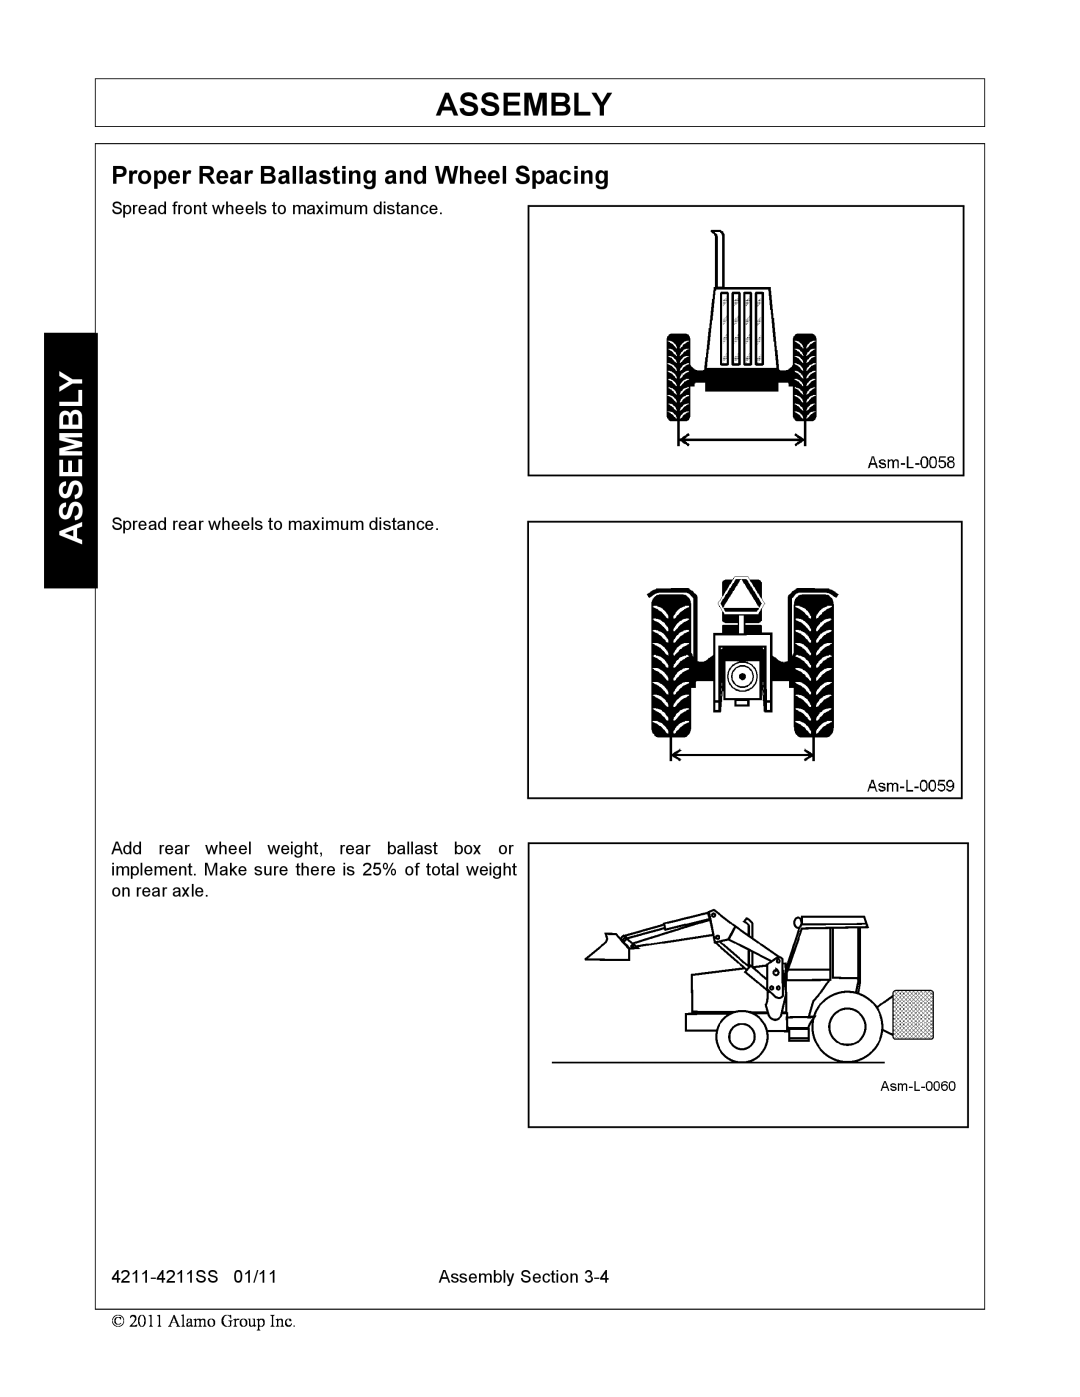 Servis-Rhino 4211SS manual Assembly, Proper Rear Ballasting and Wheel Spacing 